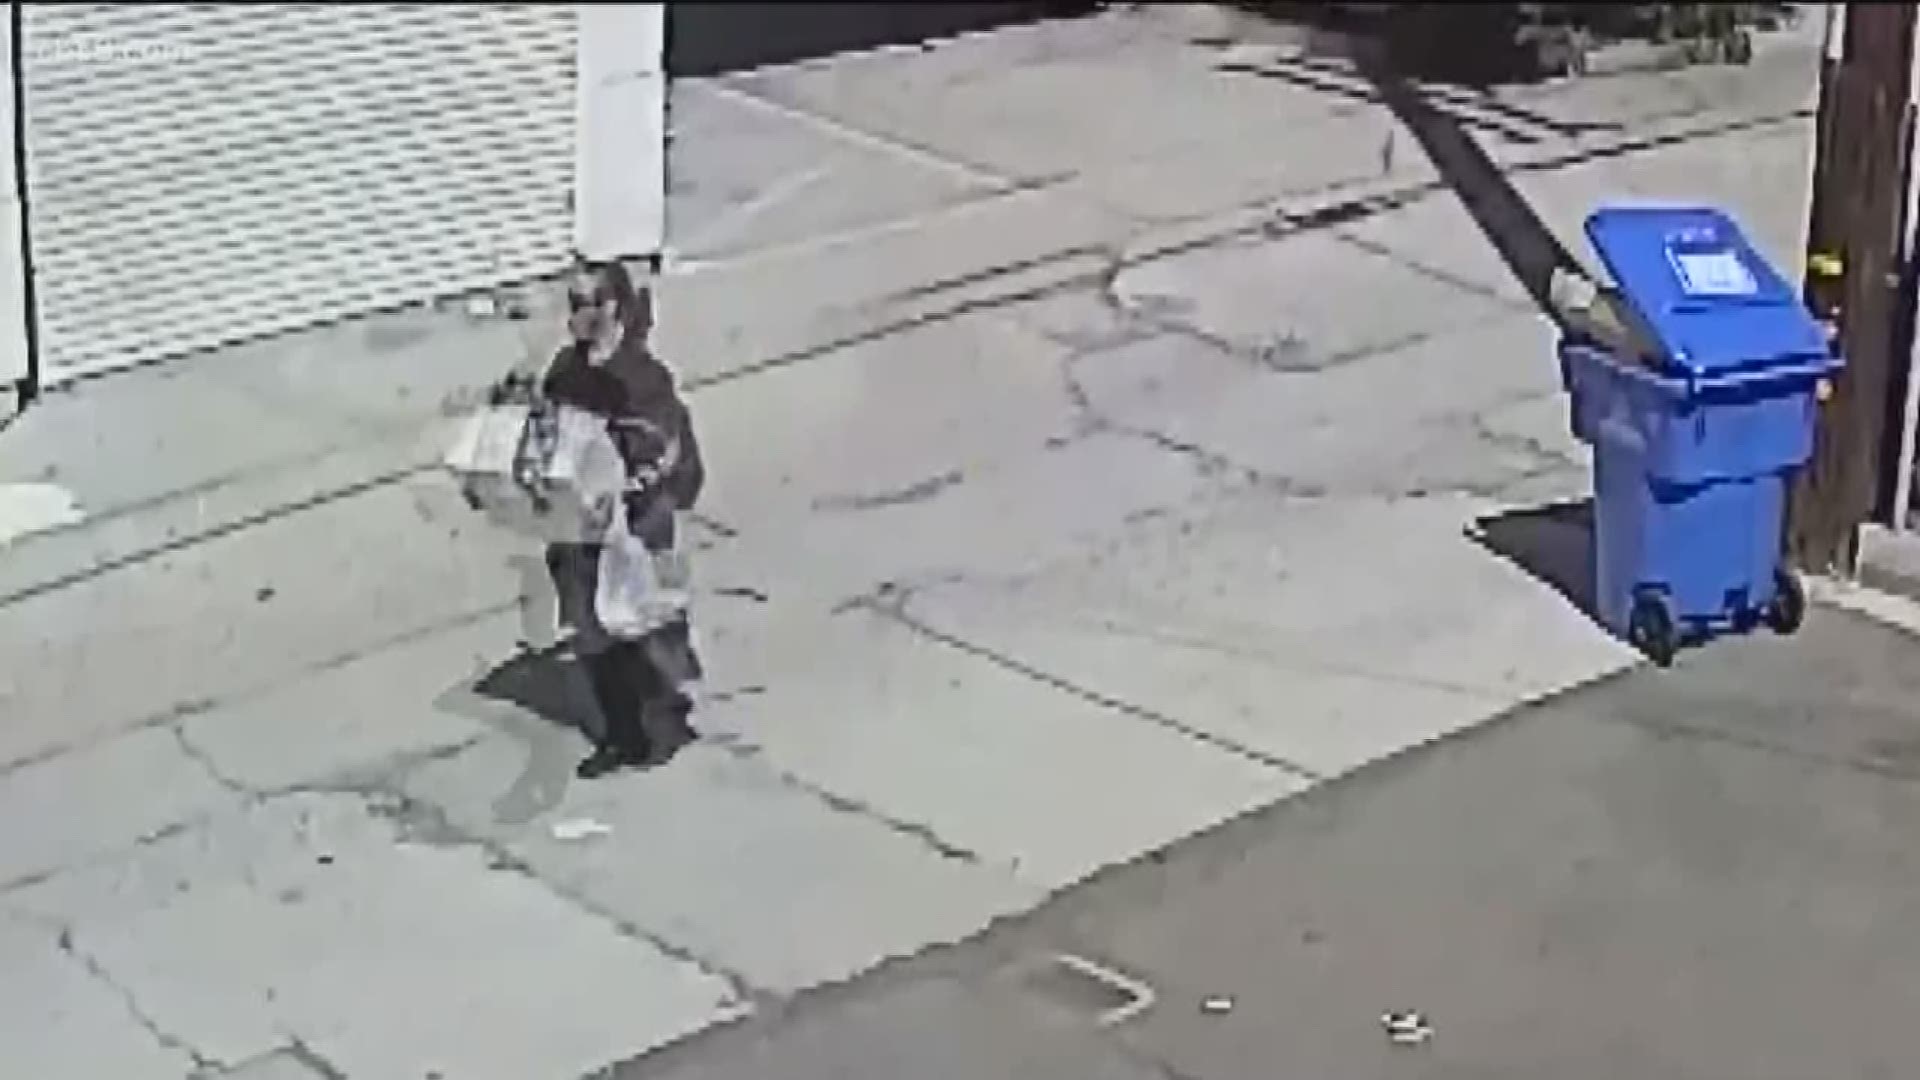 Pacific Beach has a crime problem. This one was caught on camera.